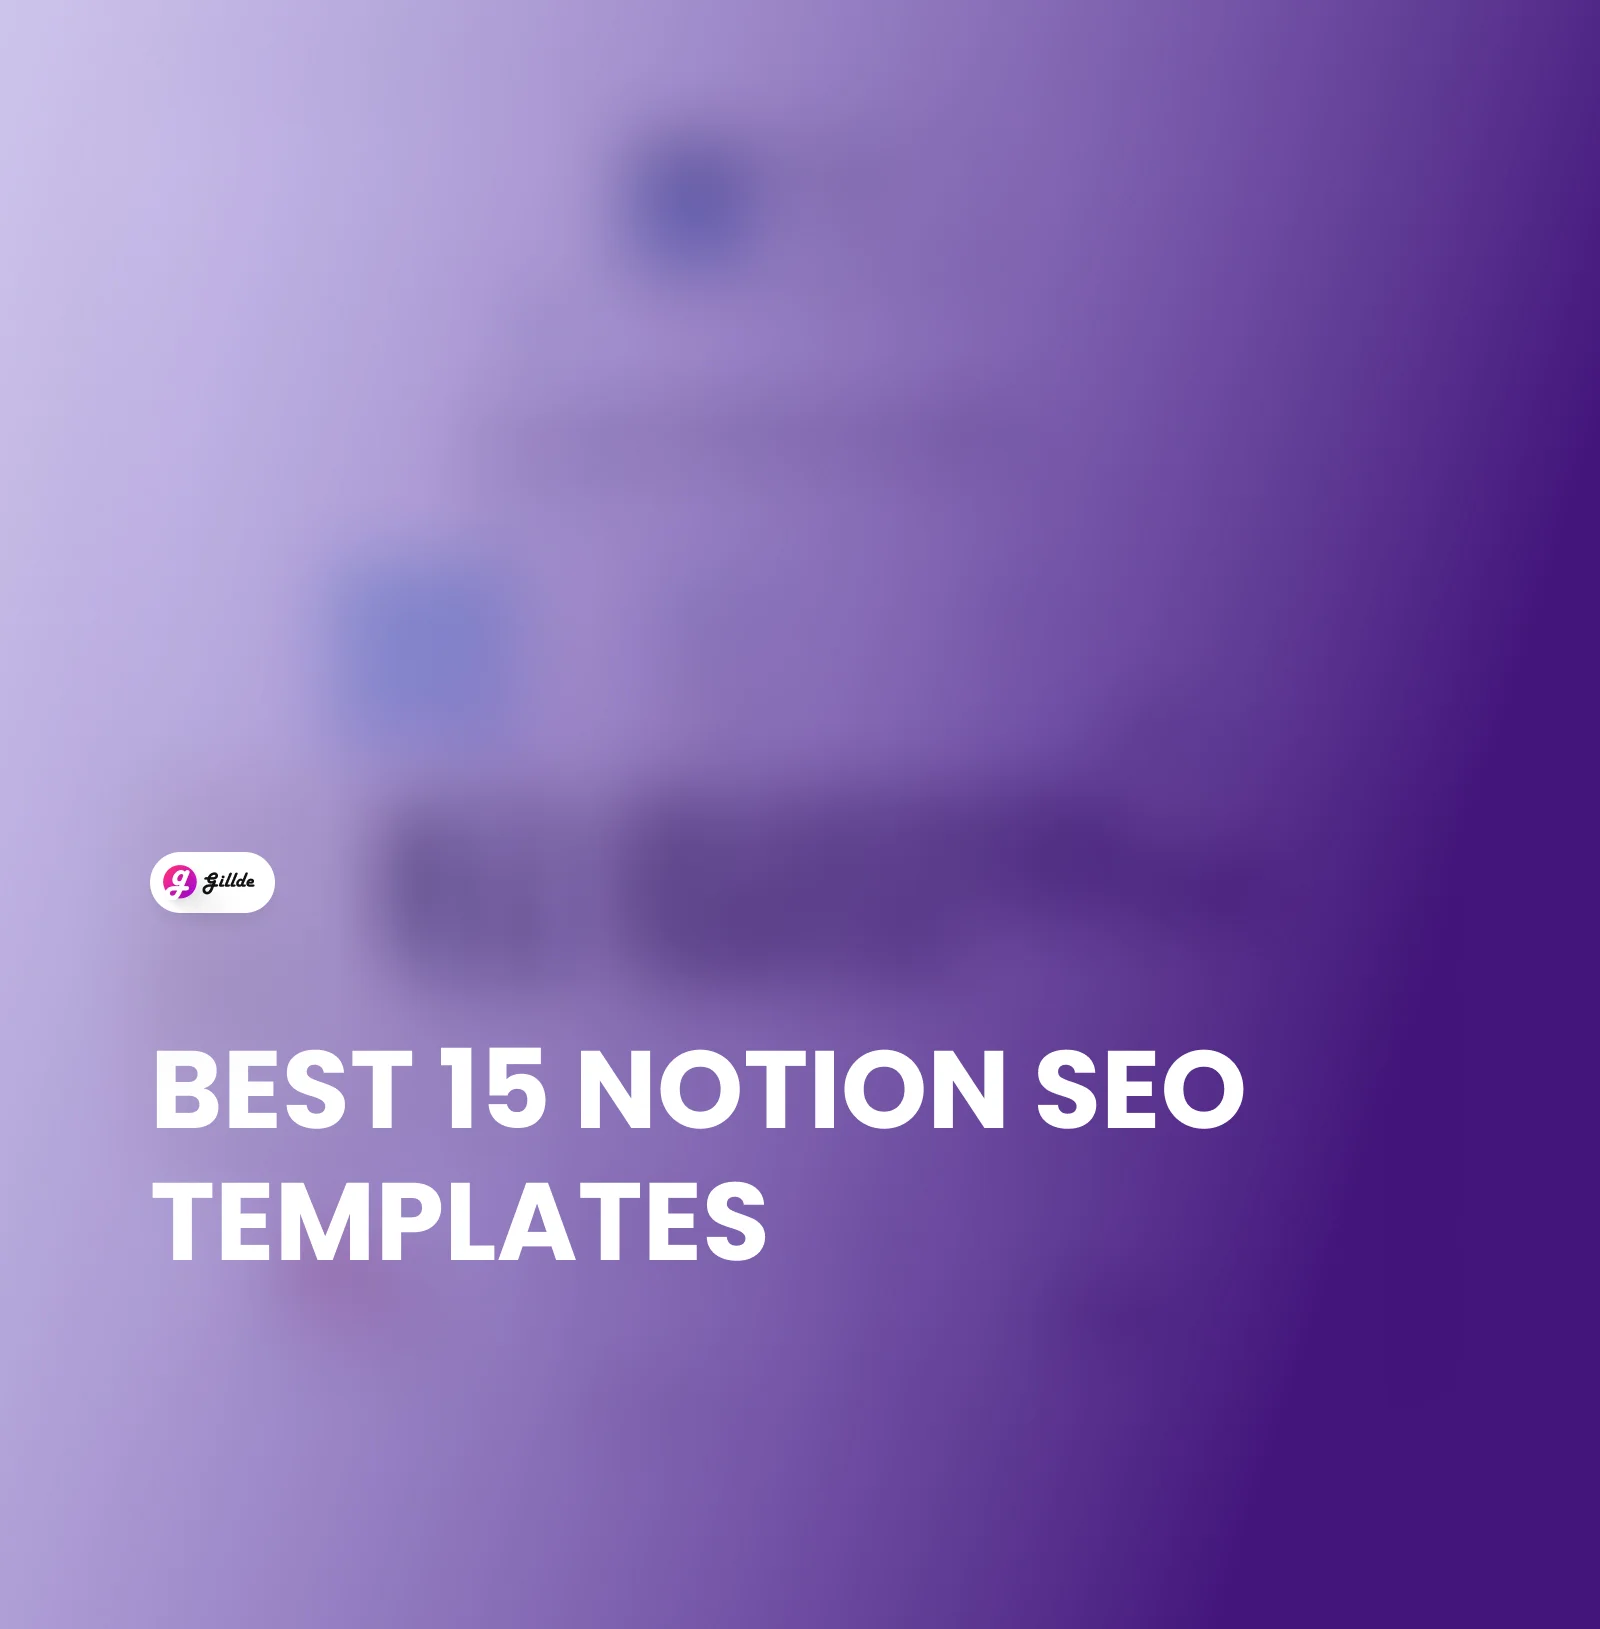 Notion SEO Template